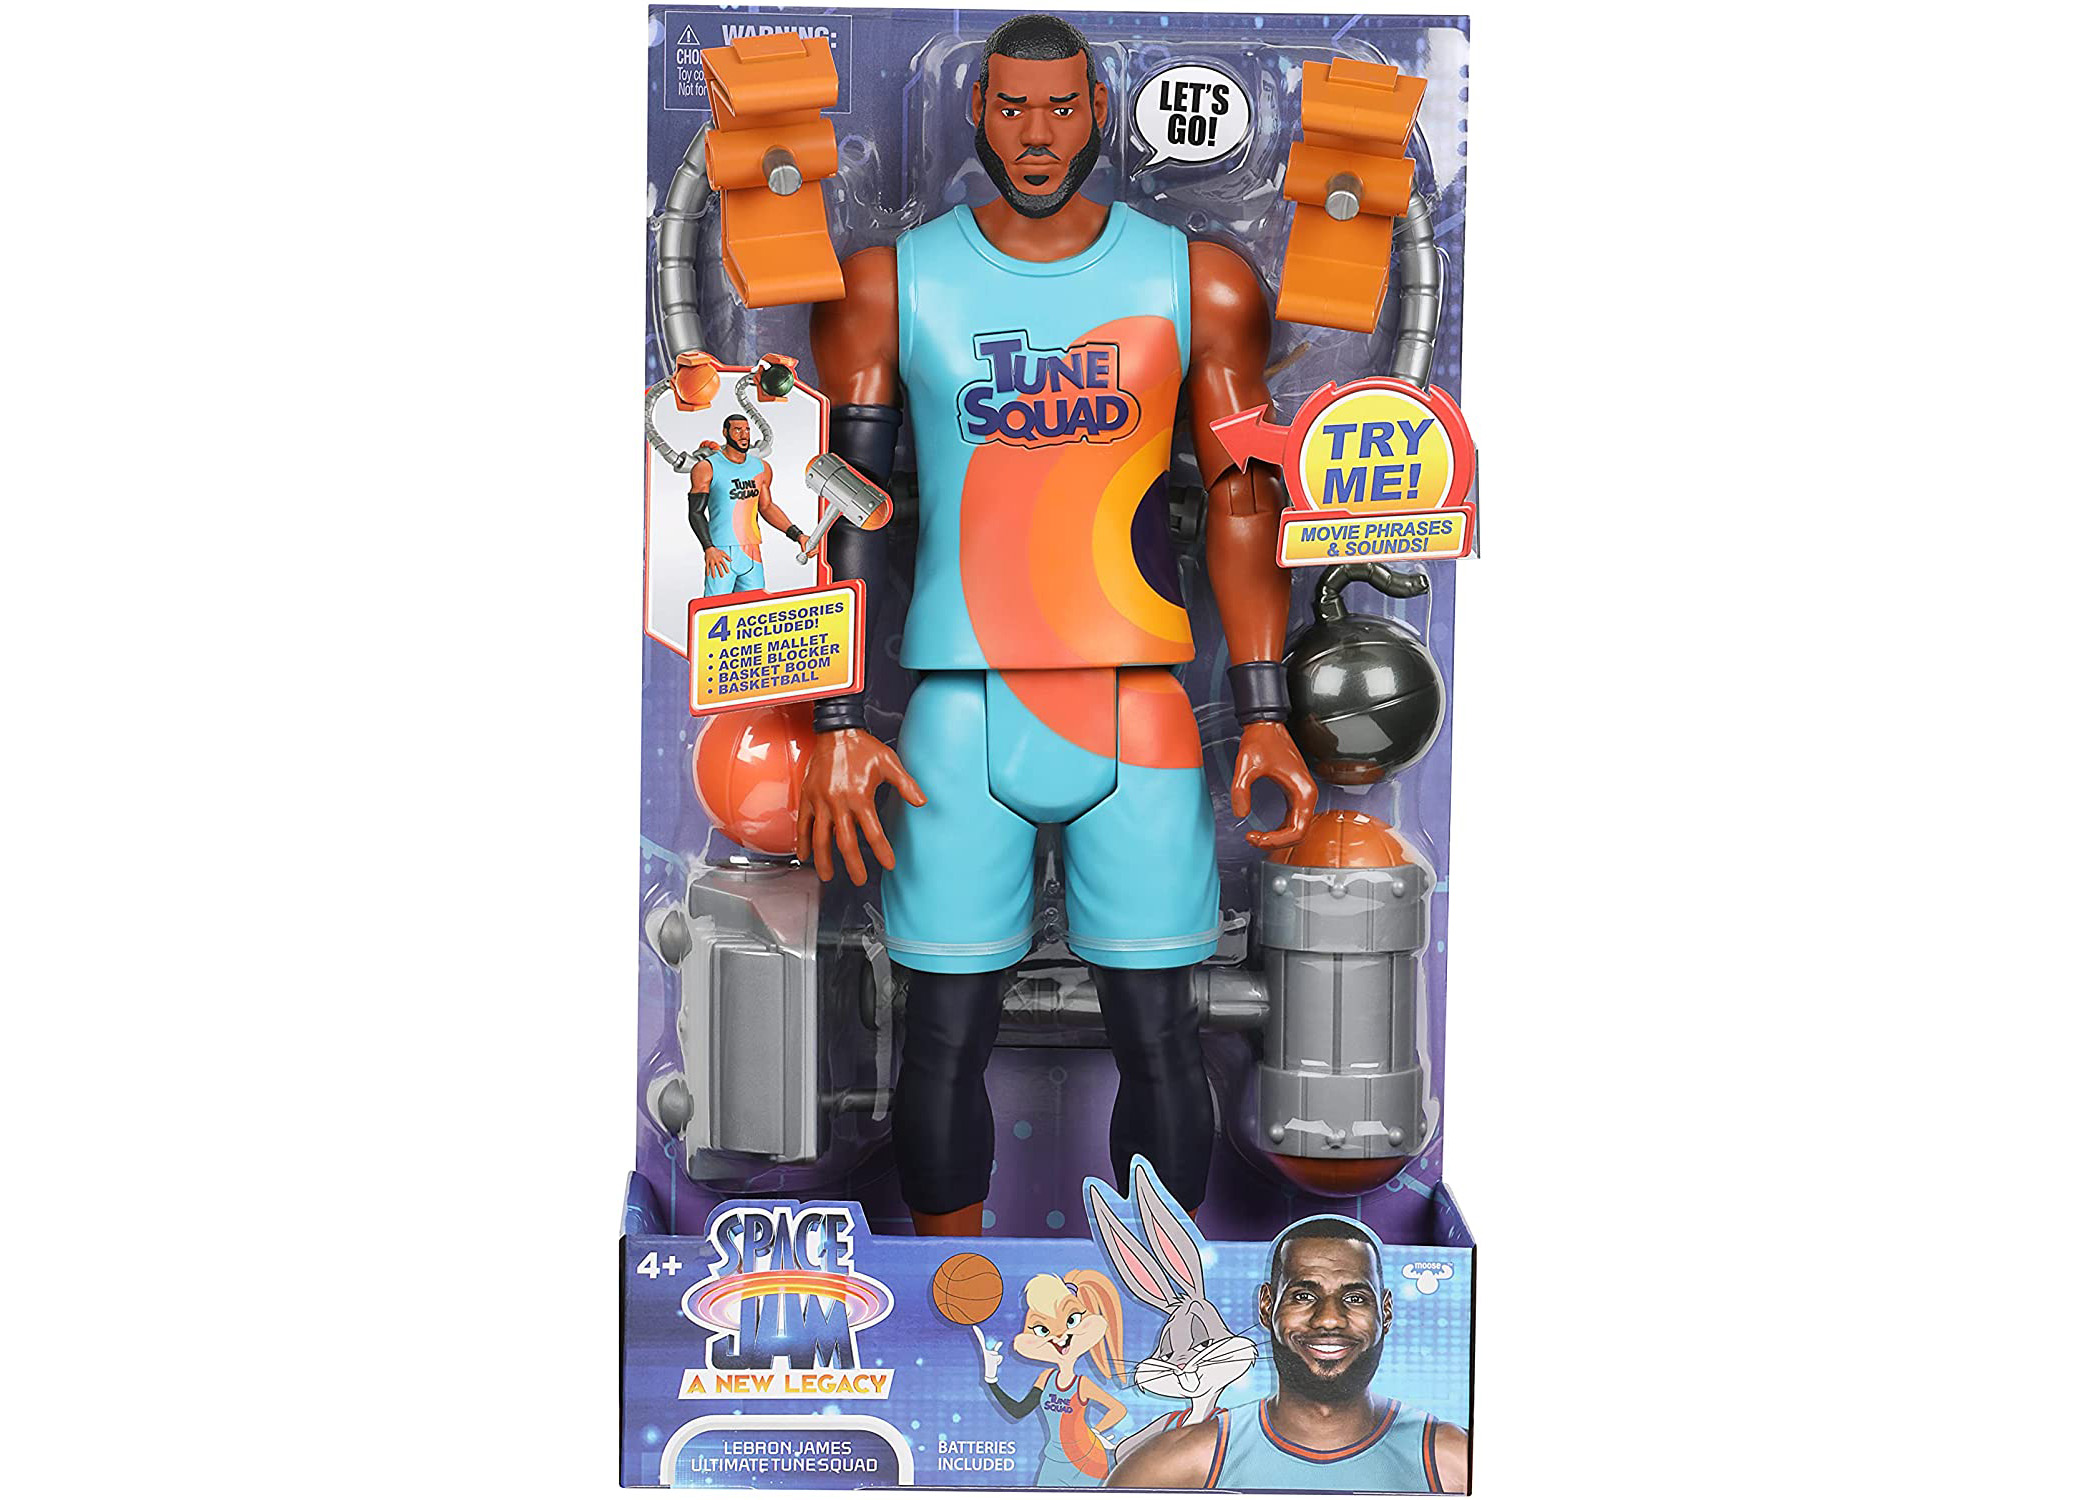 Space Jam A New Legacy - Lebron James Ultimate Tune Squad Action Figure